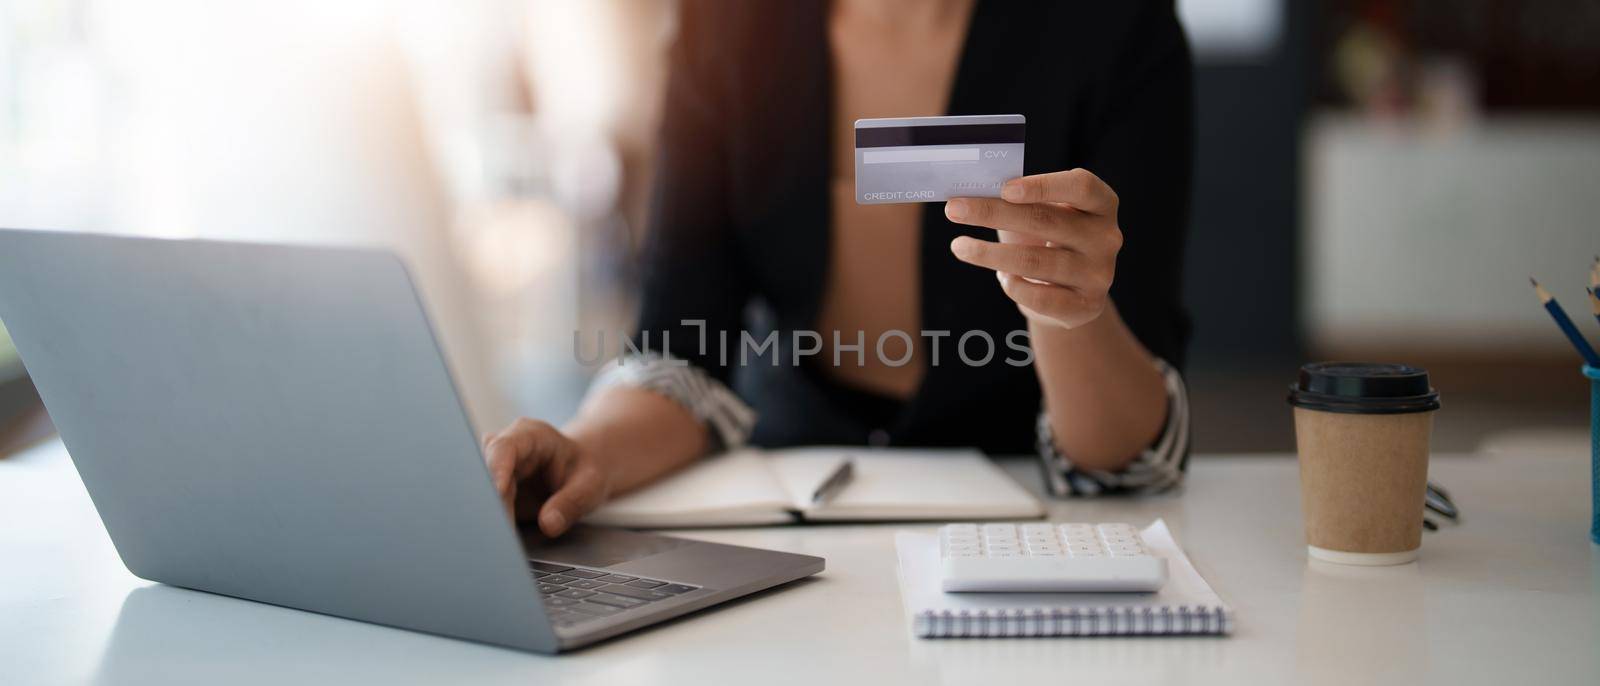 Young woman holding credit card and using laptop computer. Businesswoman working at home. Online shopping, e-commerce, internet banking, spending money, working from home concept.